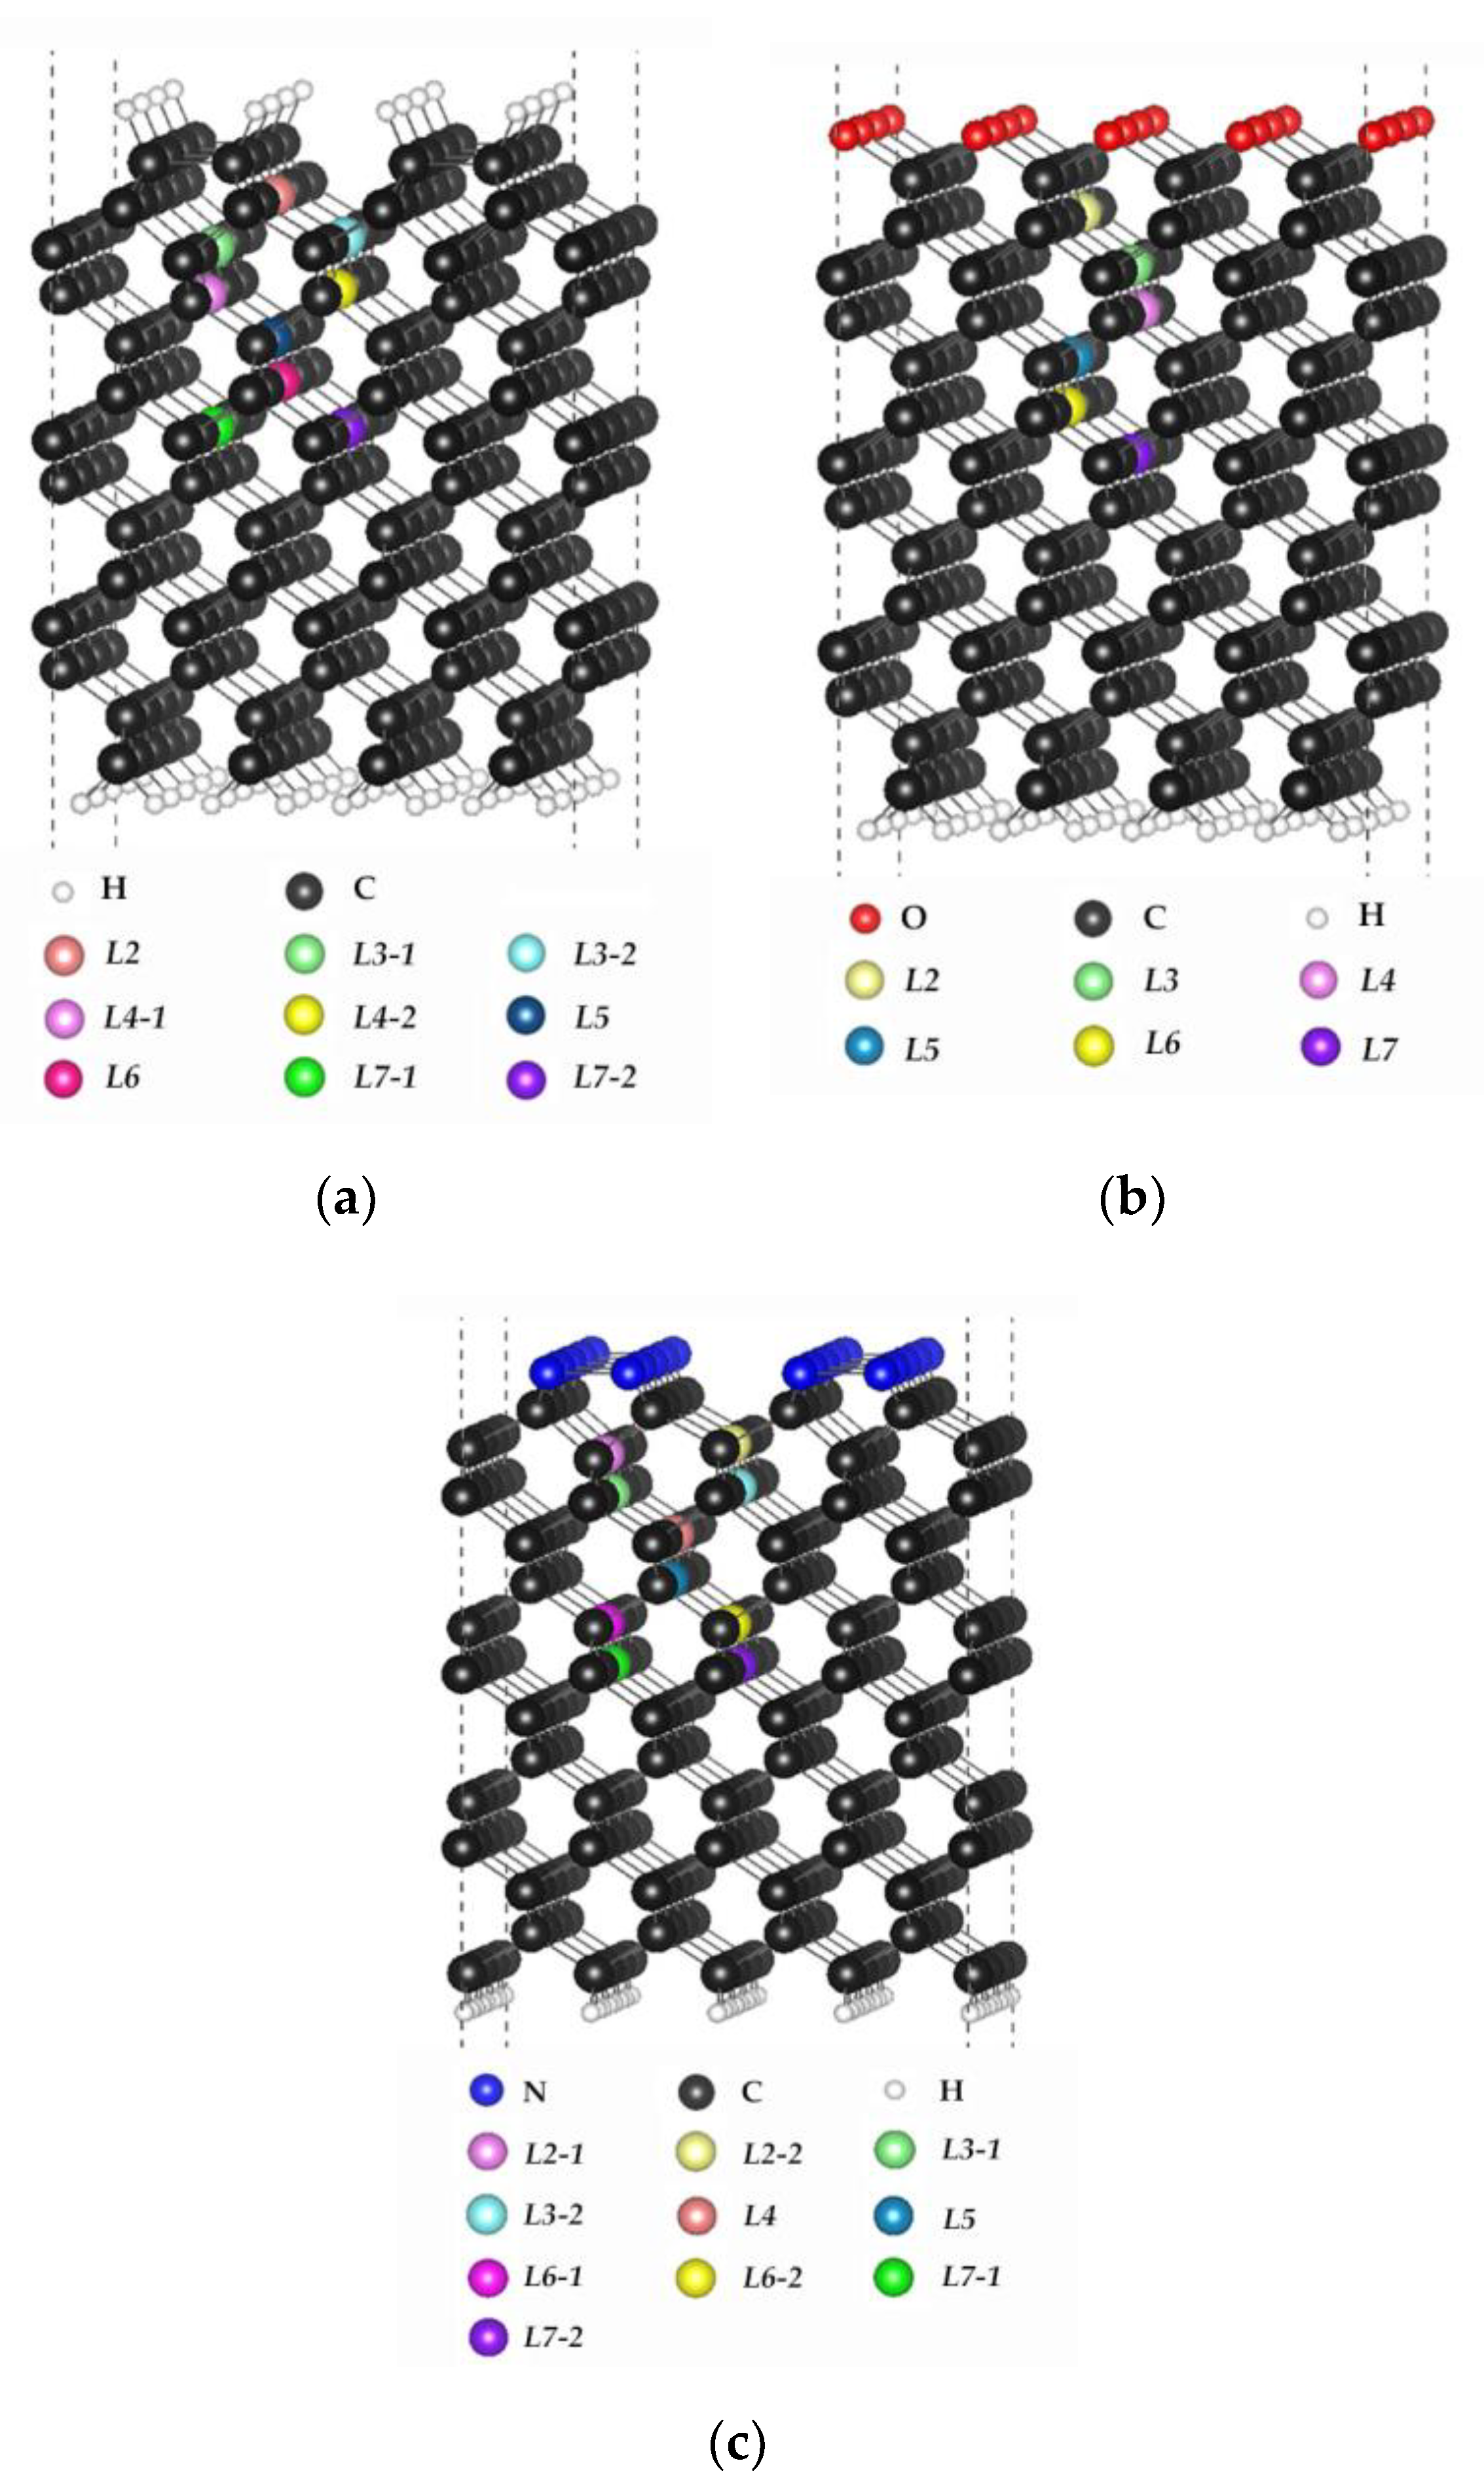 Applied Sciences Free Full Text A Theoretical Study Of The Energetic Stability And Geometry Of Silicon Vacancy Color Centers In Diamond 001 Surfaces Html